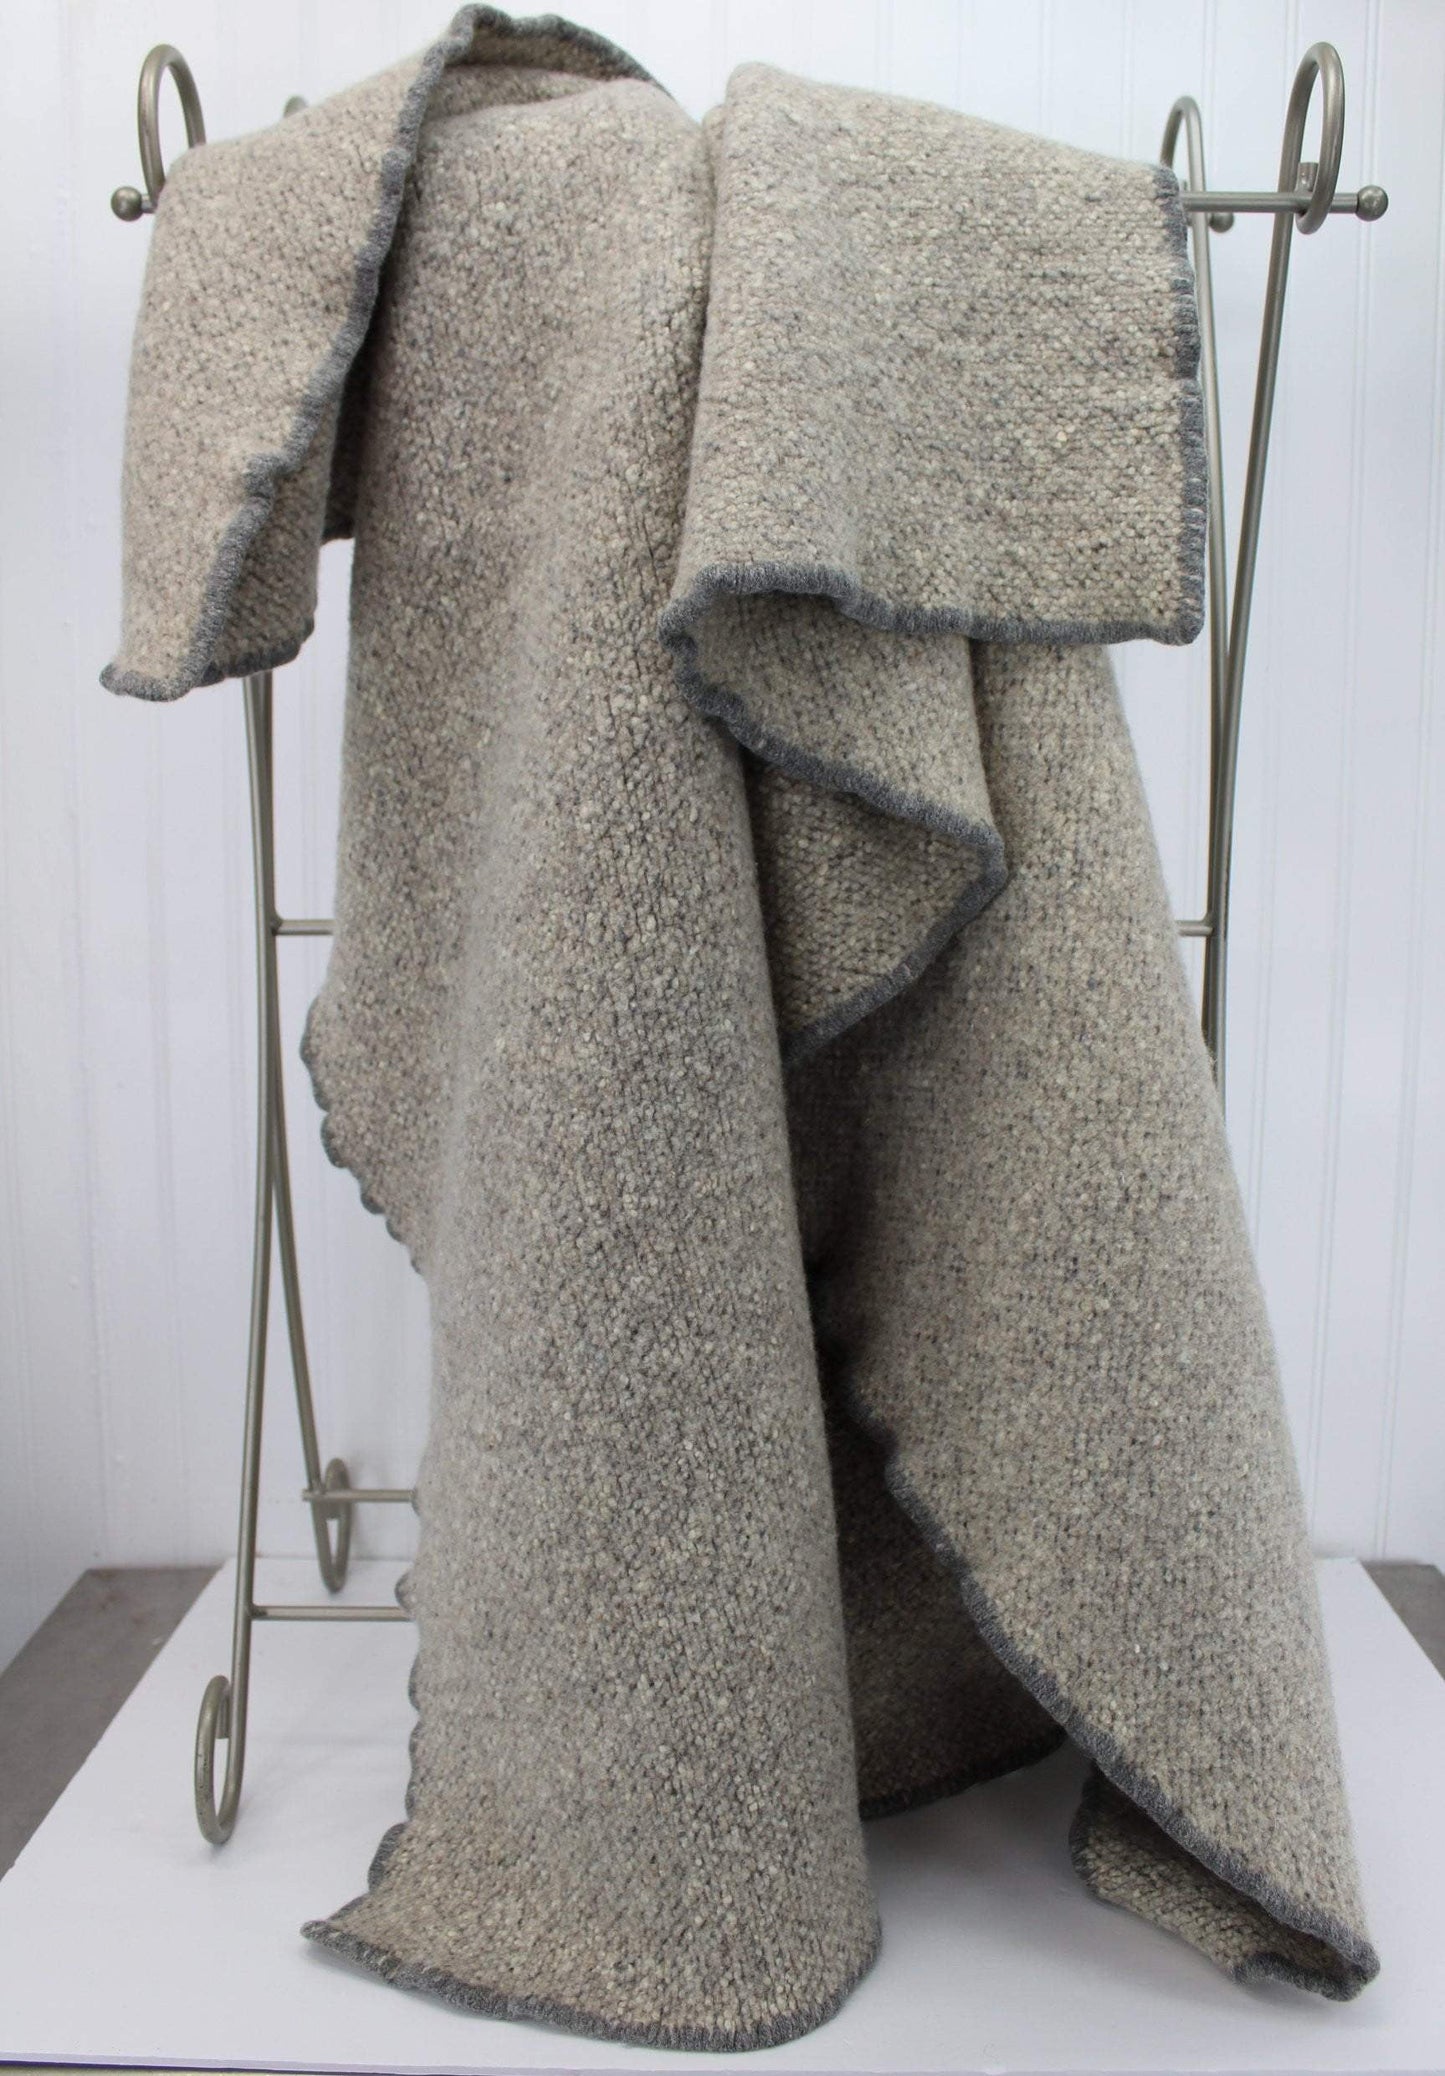 Handsome Travel Rug Blanket - Textured Woven Wool - Very Heavy comfortable on the body